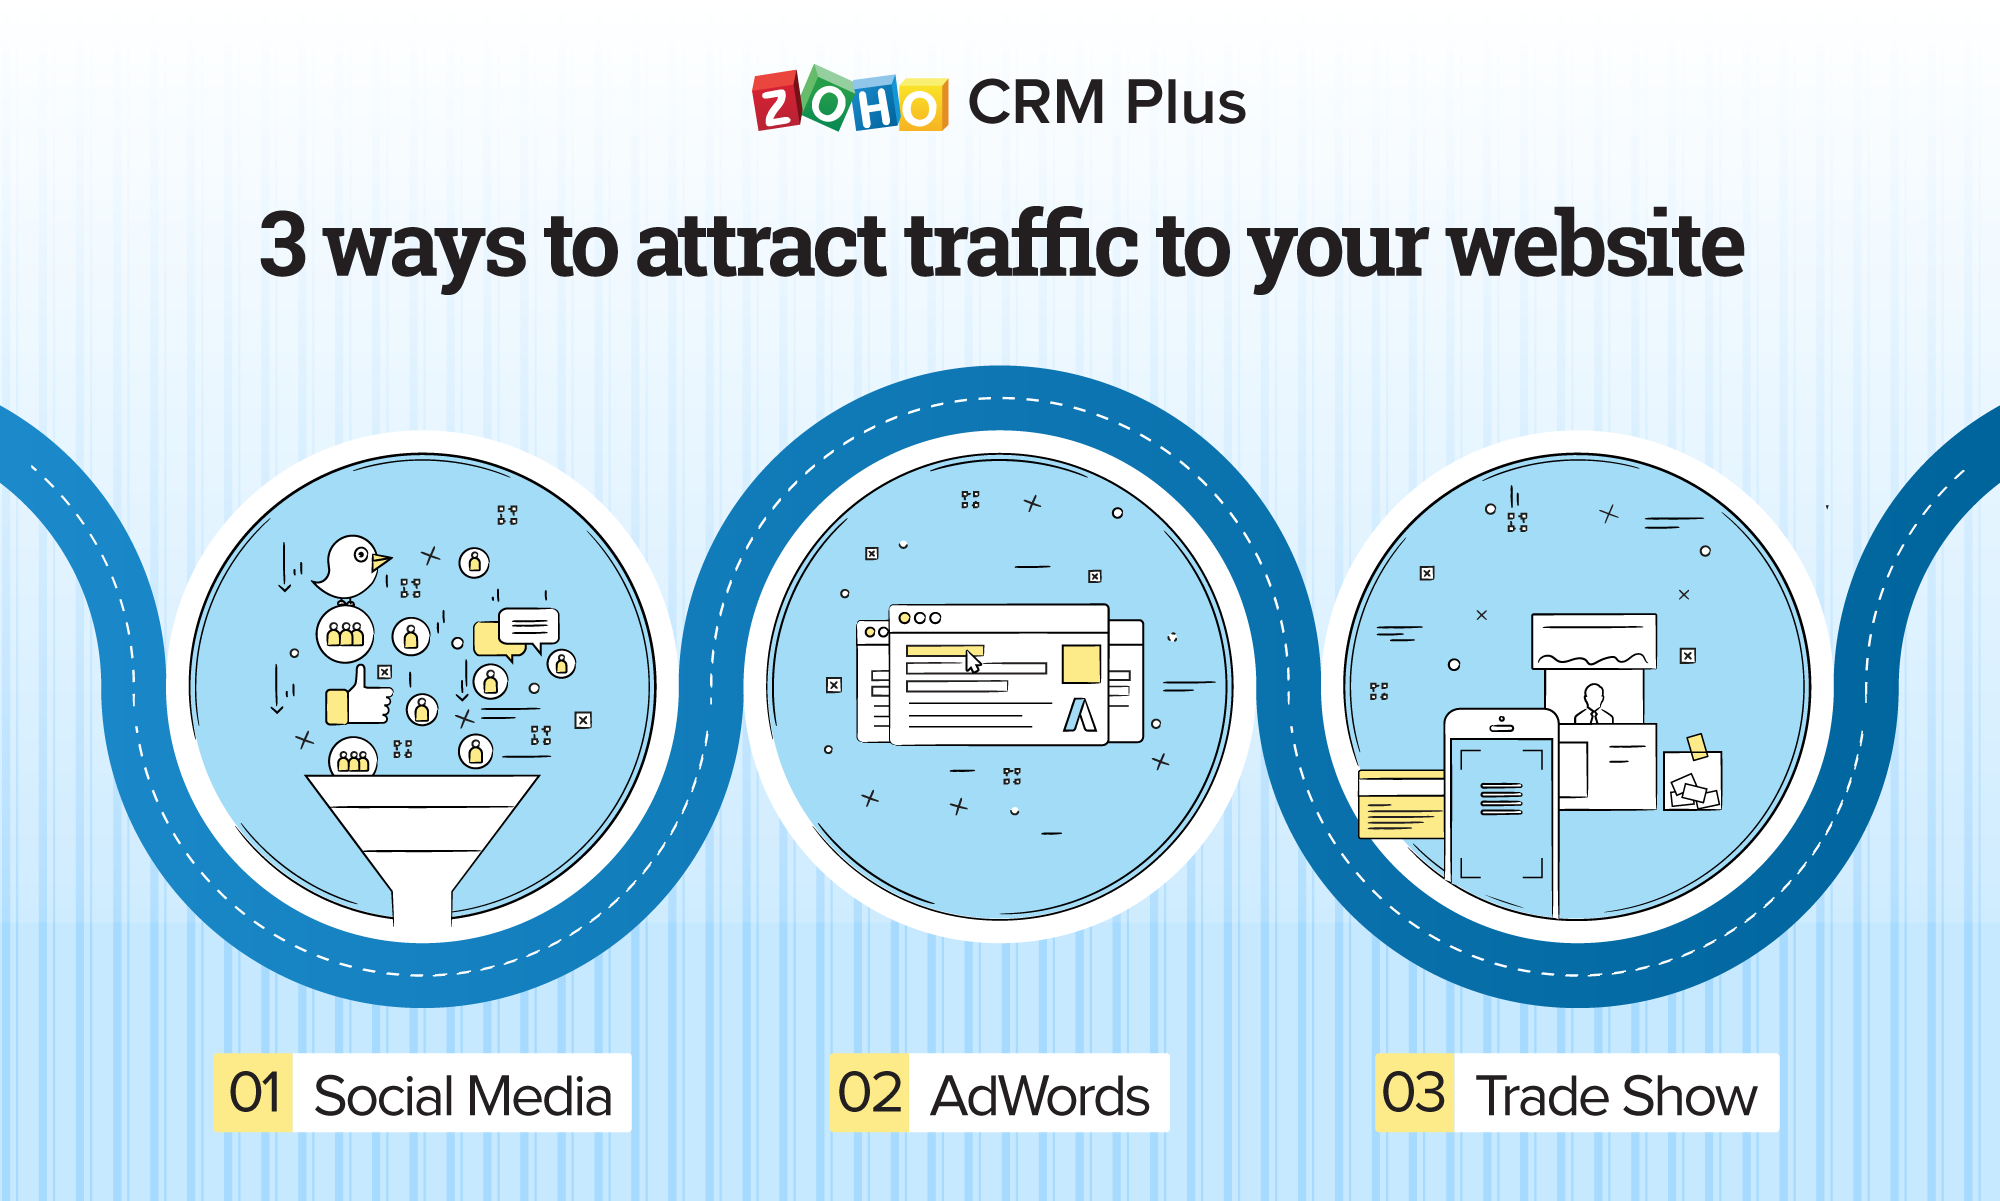 3 ways to attract traffic to your website